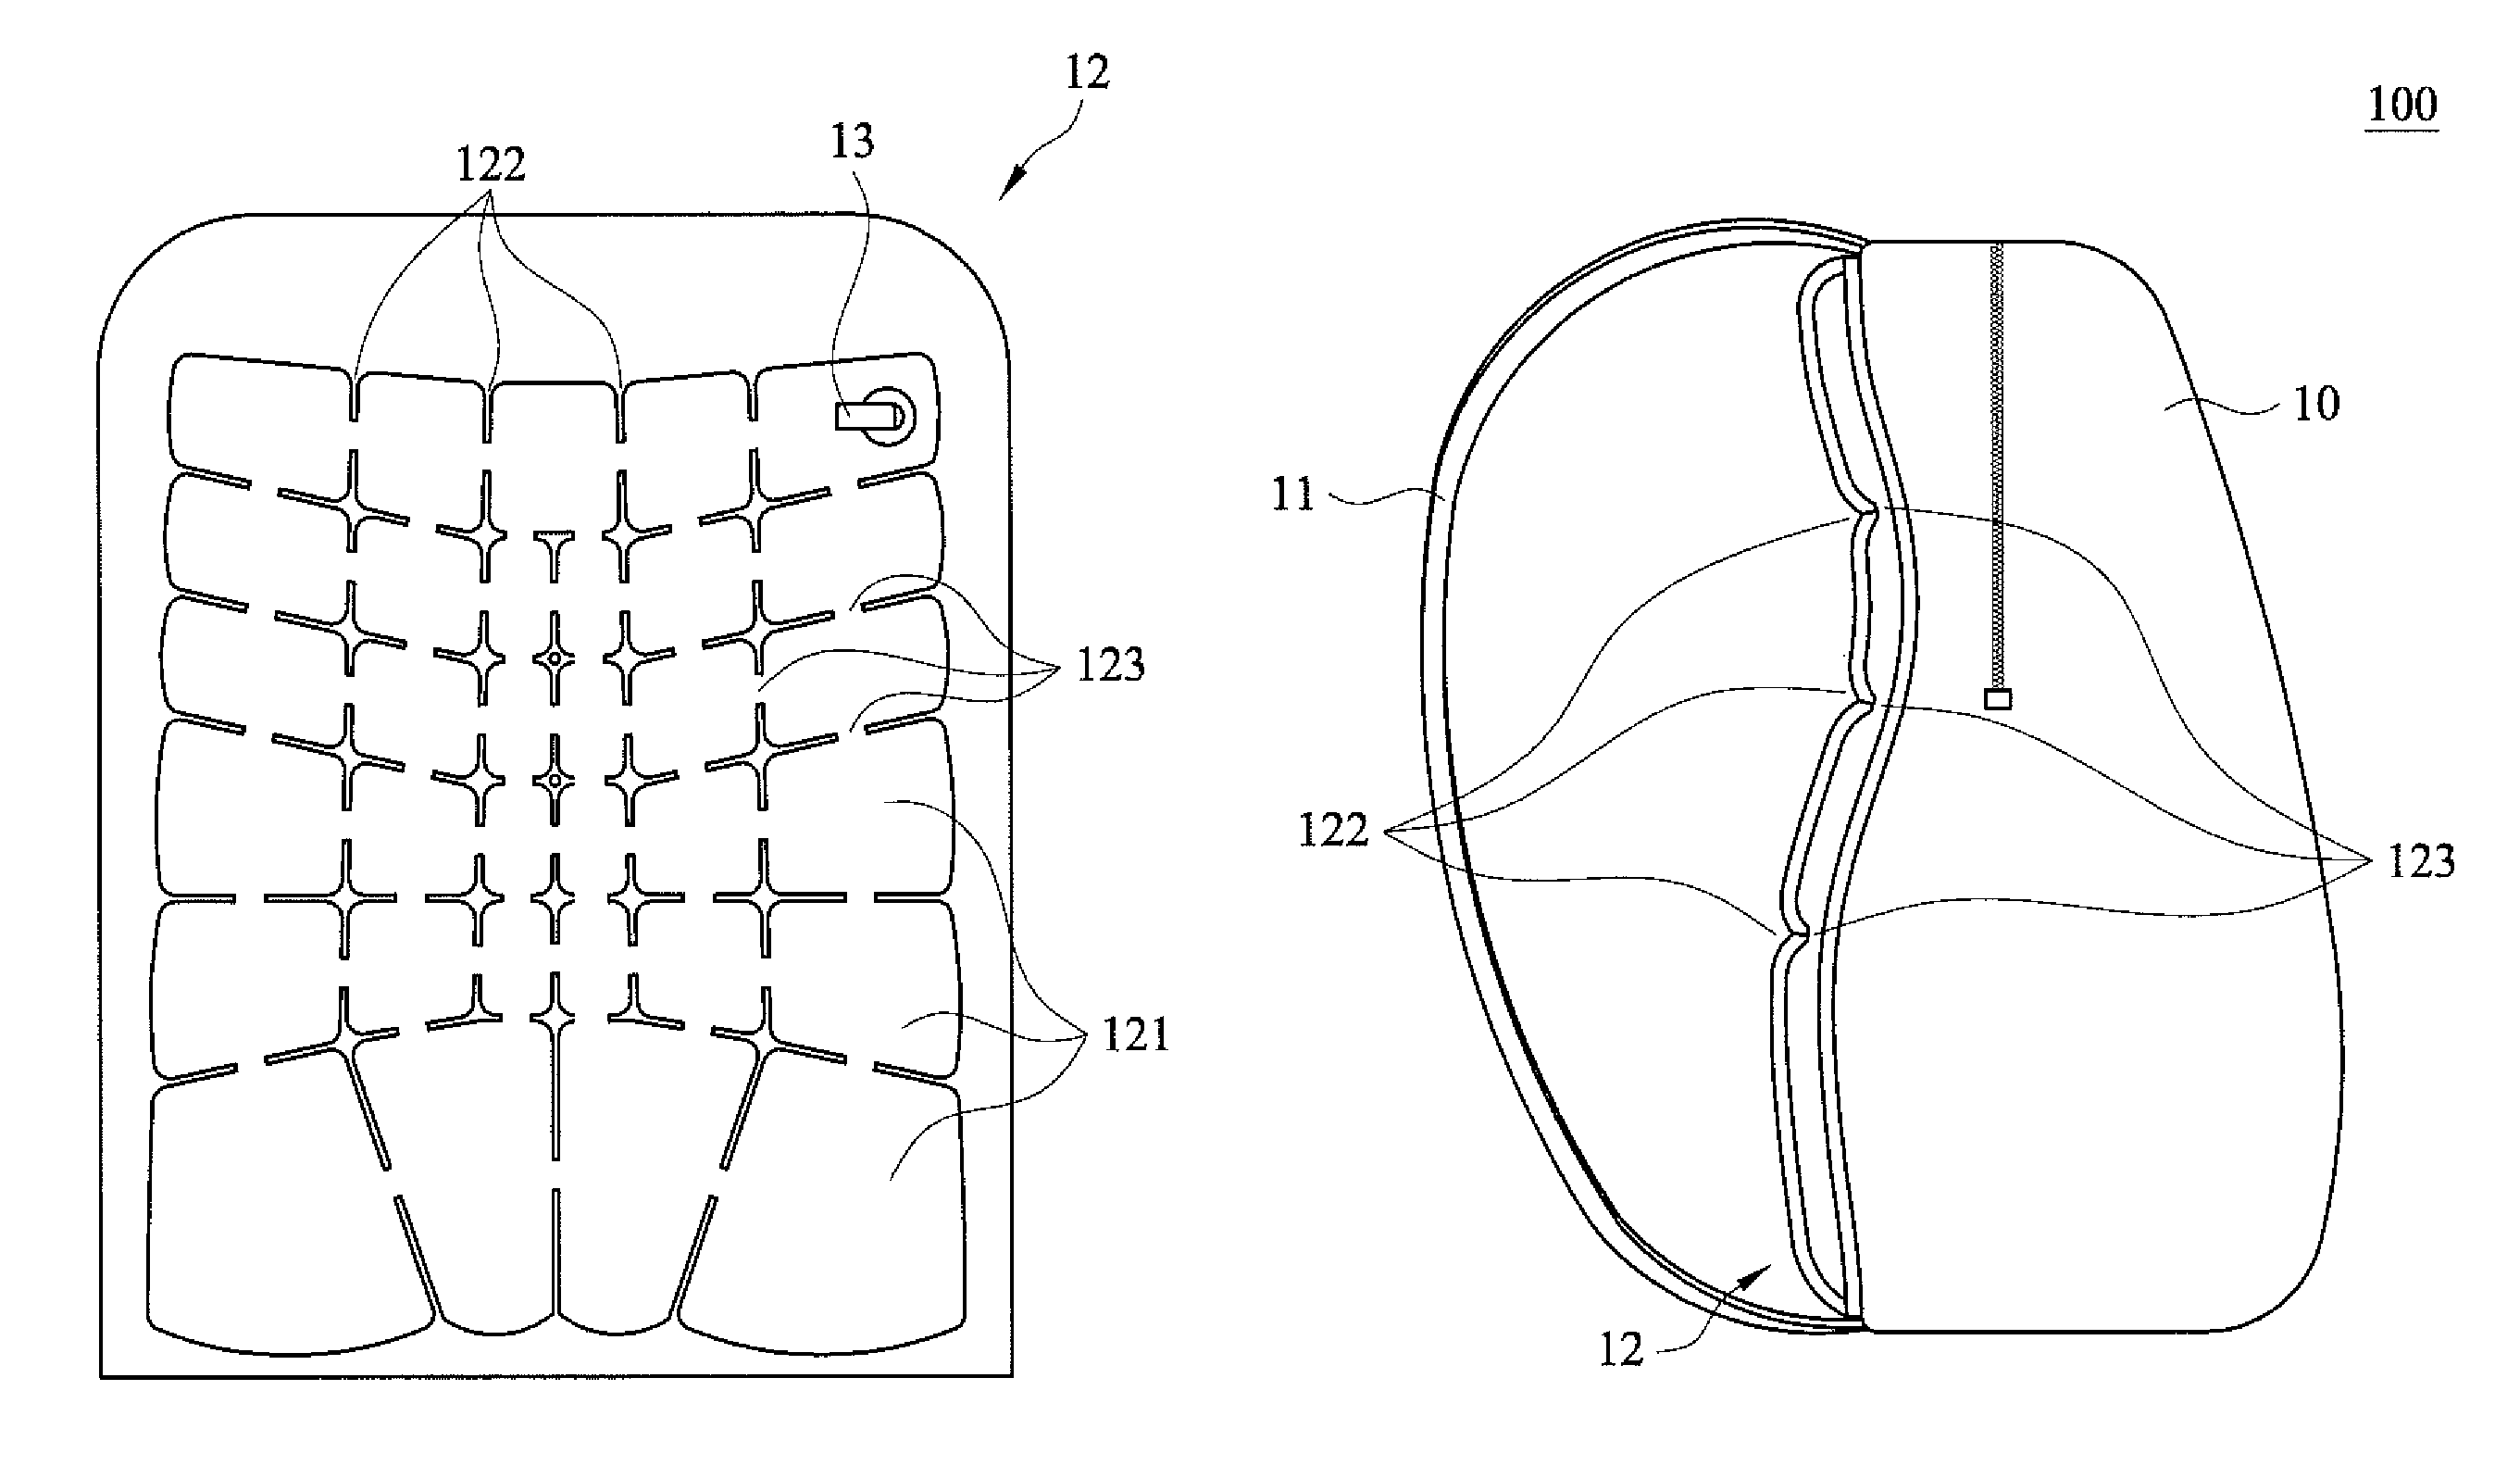 Backpack with multiple connected airbags